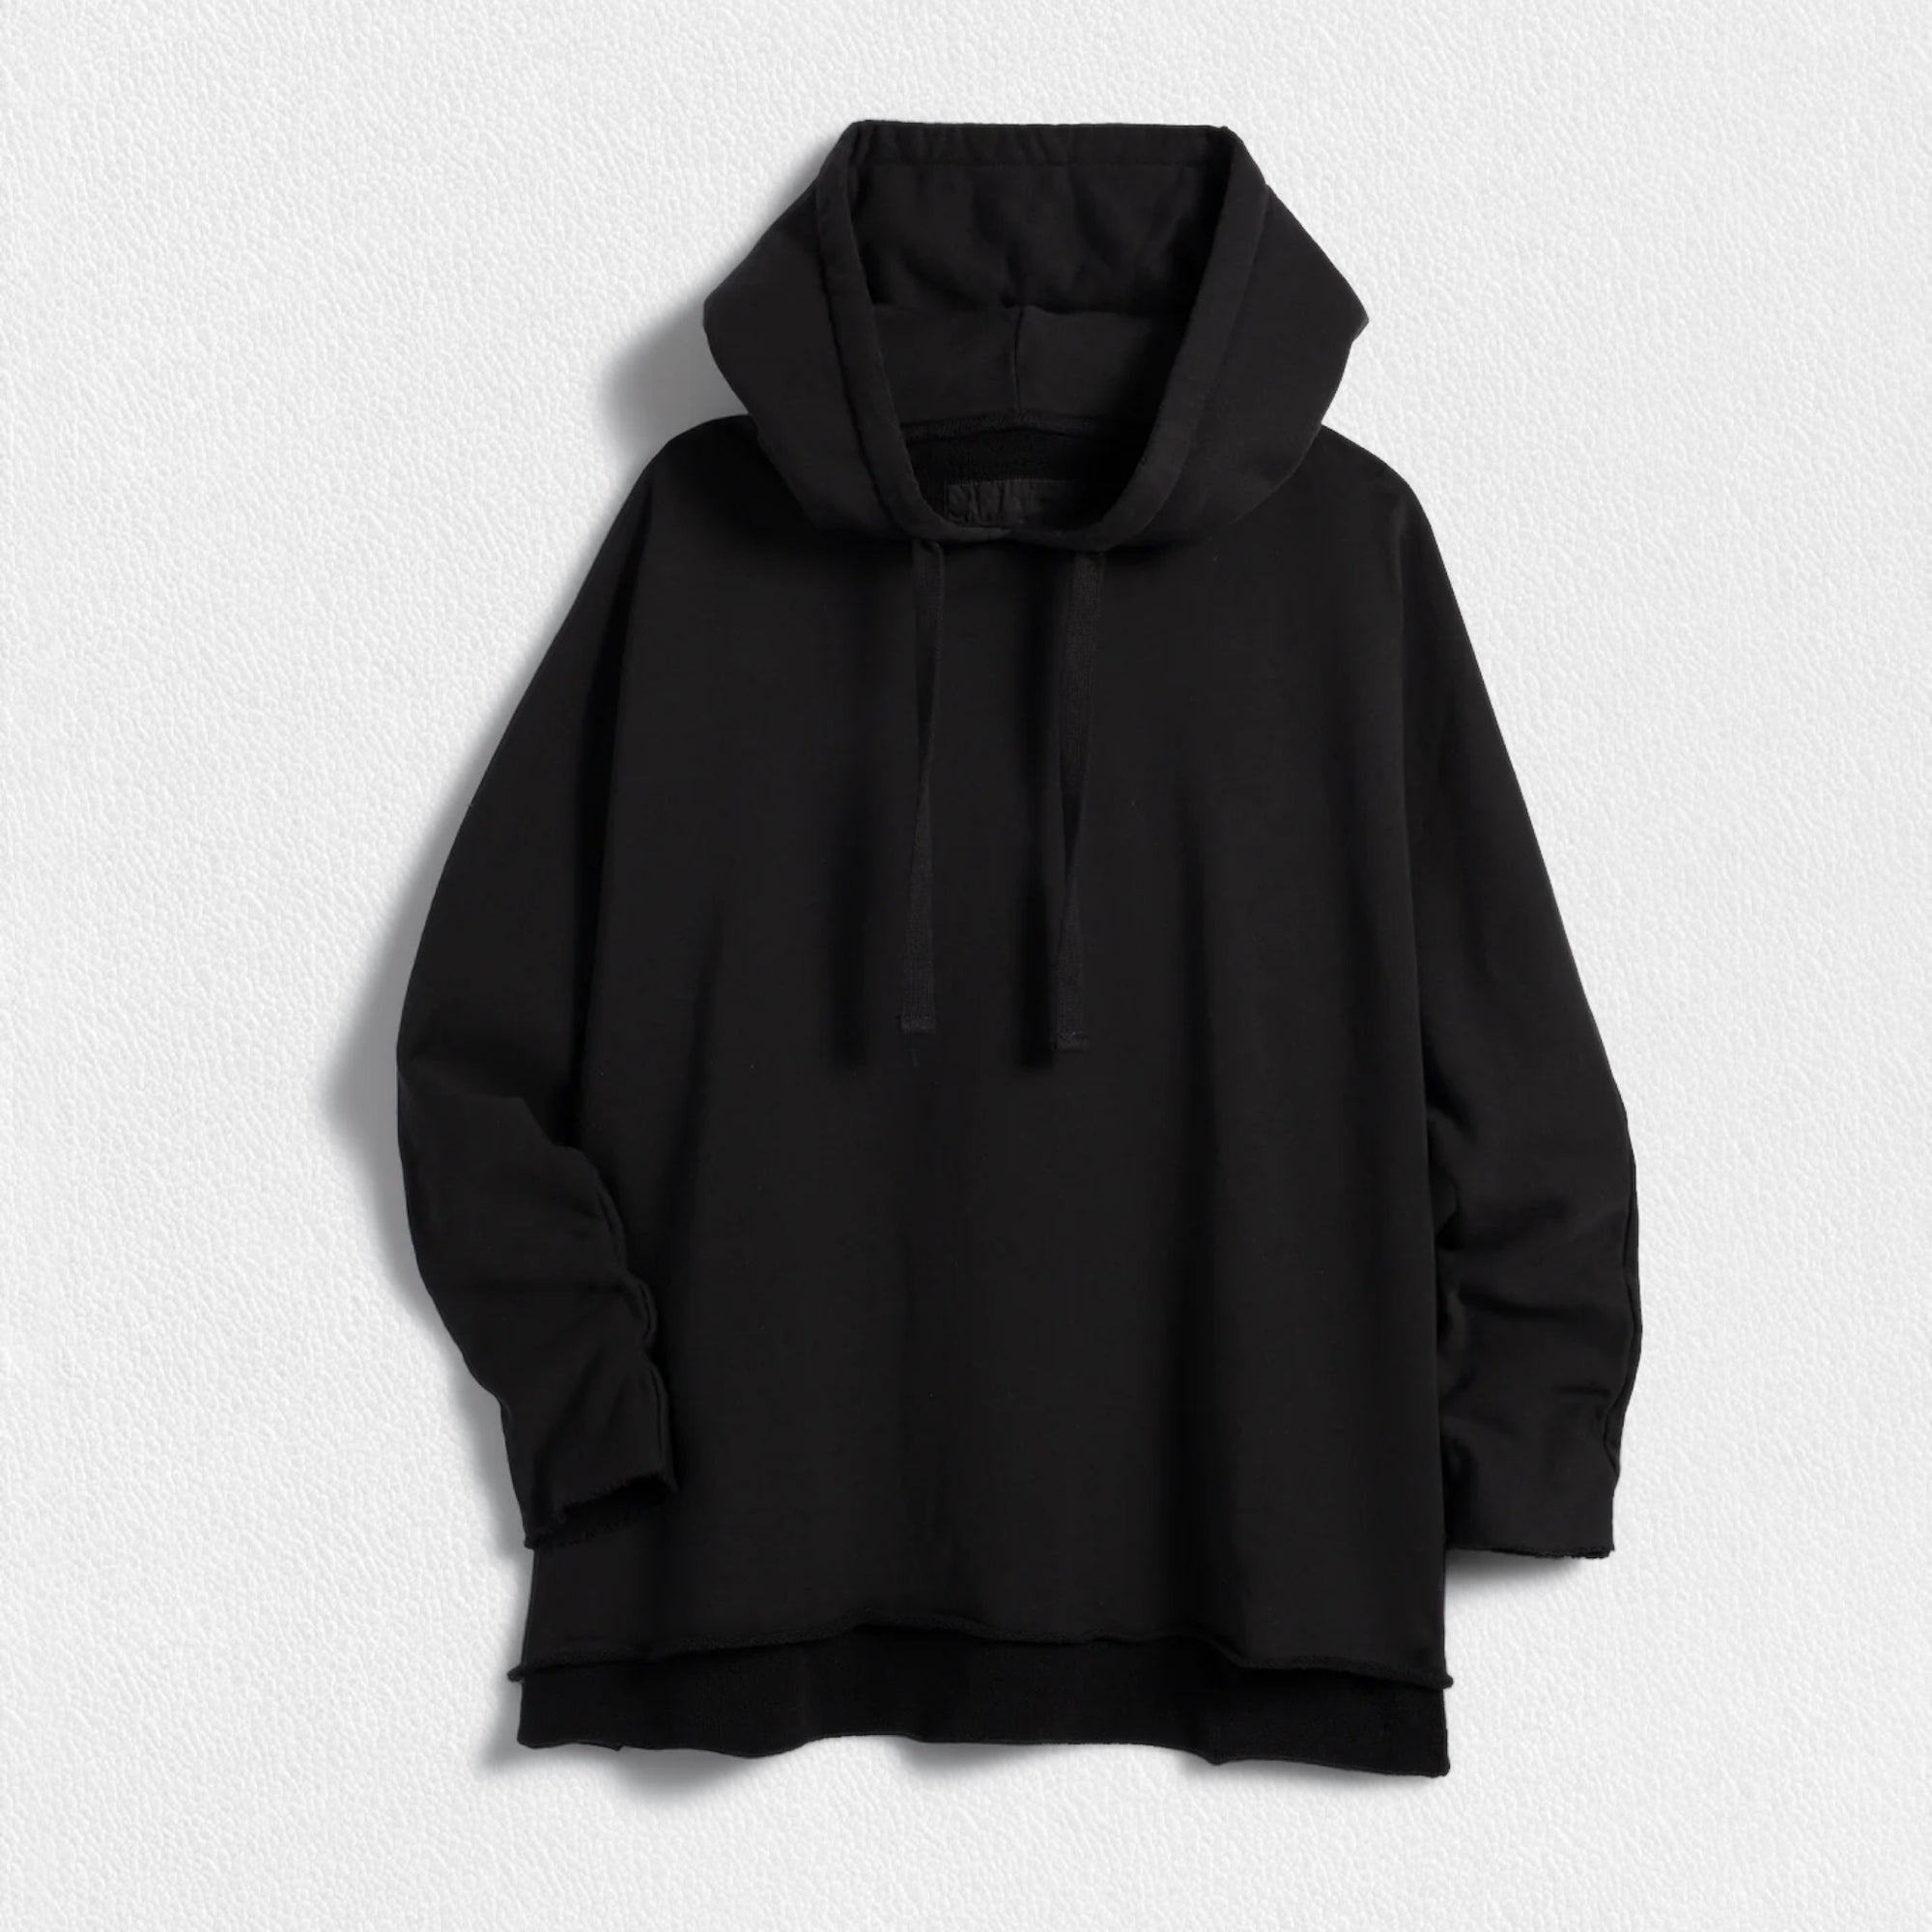 FRANK AND EILEEN - KANE CAPELET HOODIE